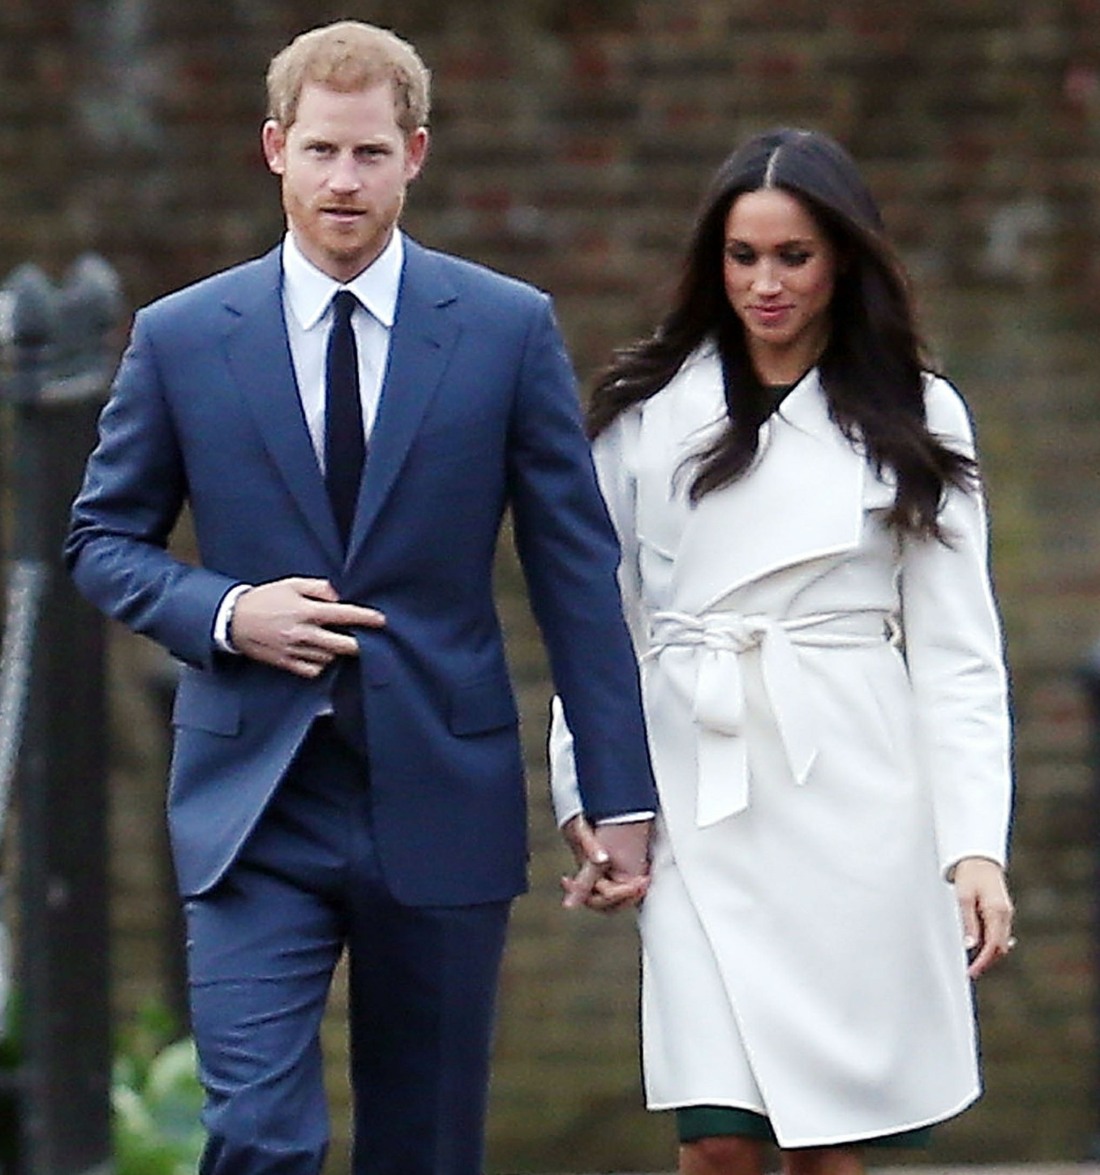 Prince Harry and fiancee Meghan Markle arriving at Kensington Palace to announce their engagement